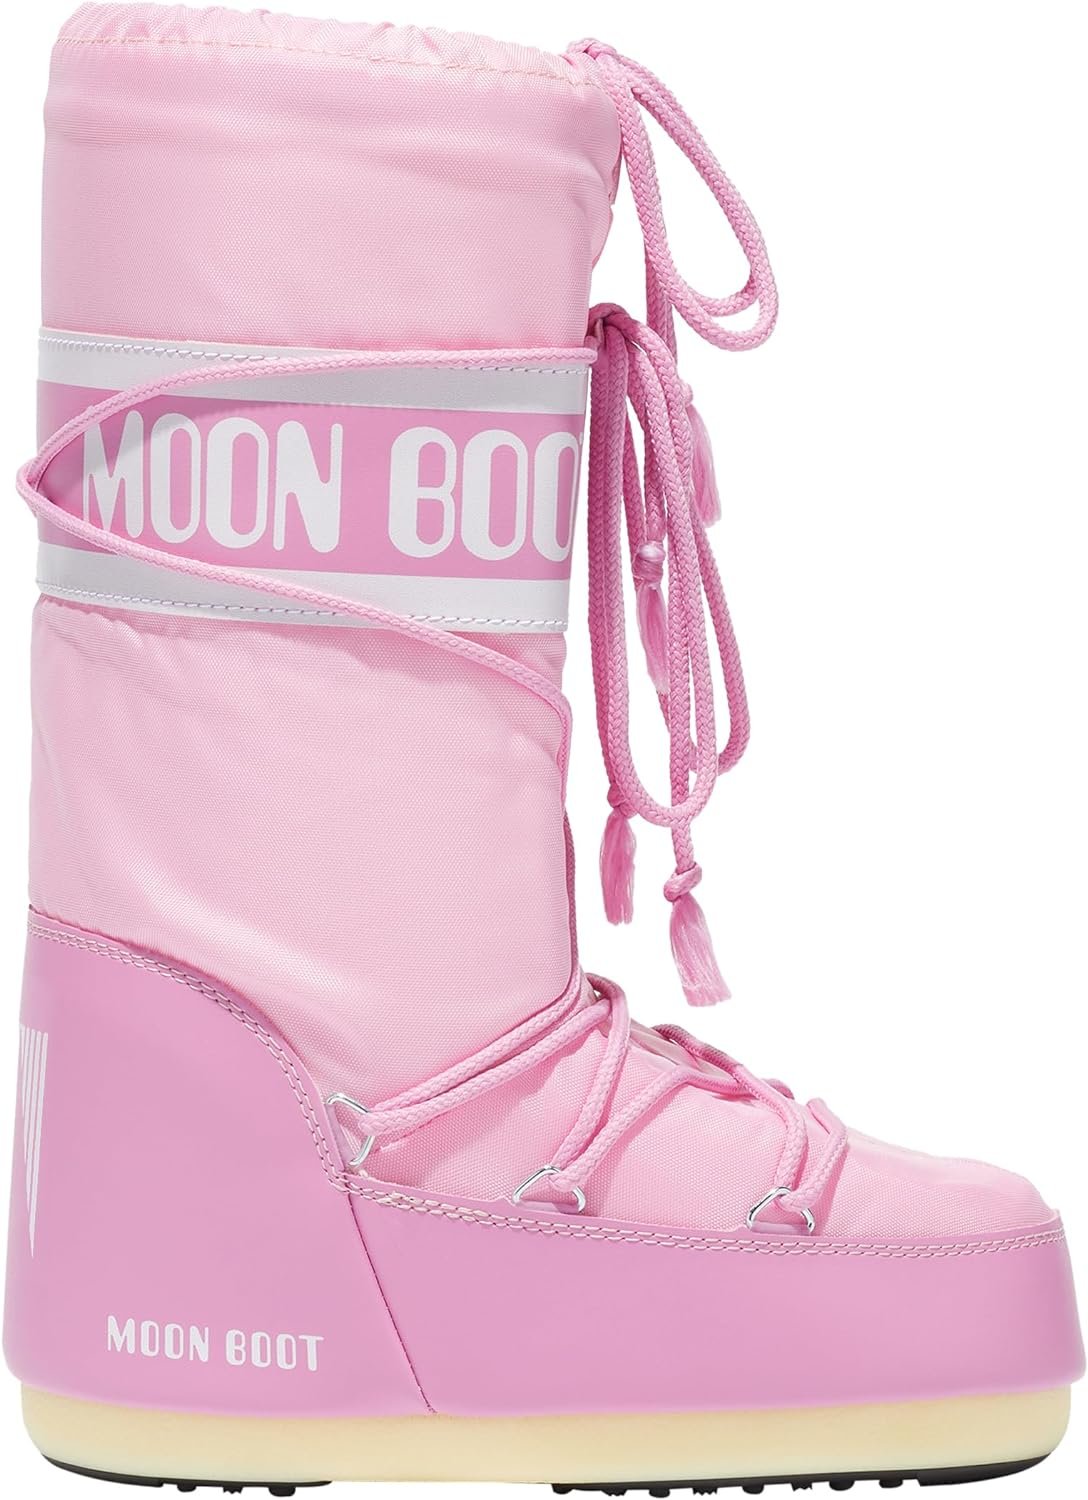 PINK MOON BOOT